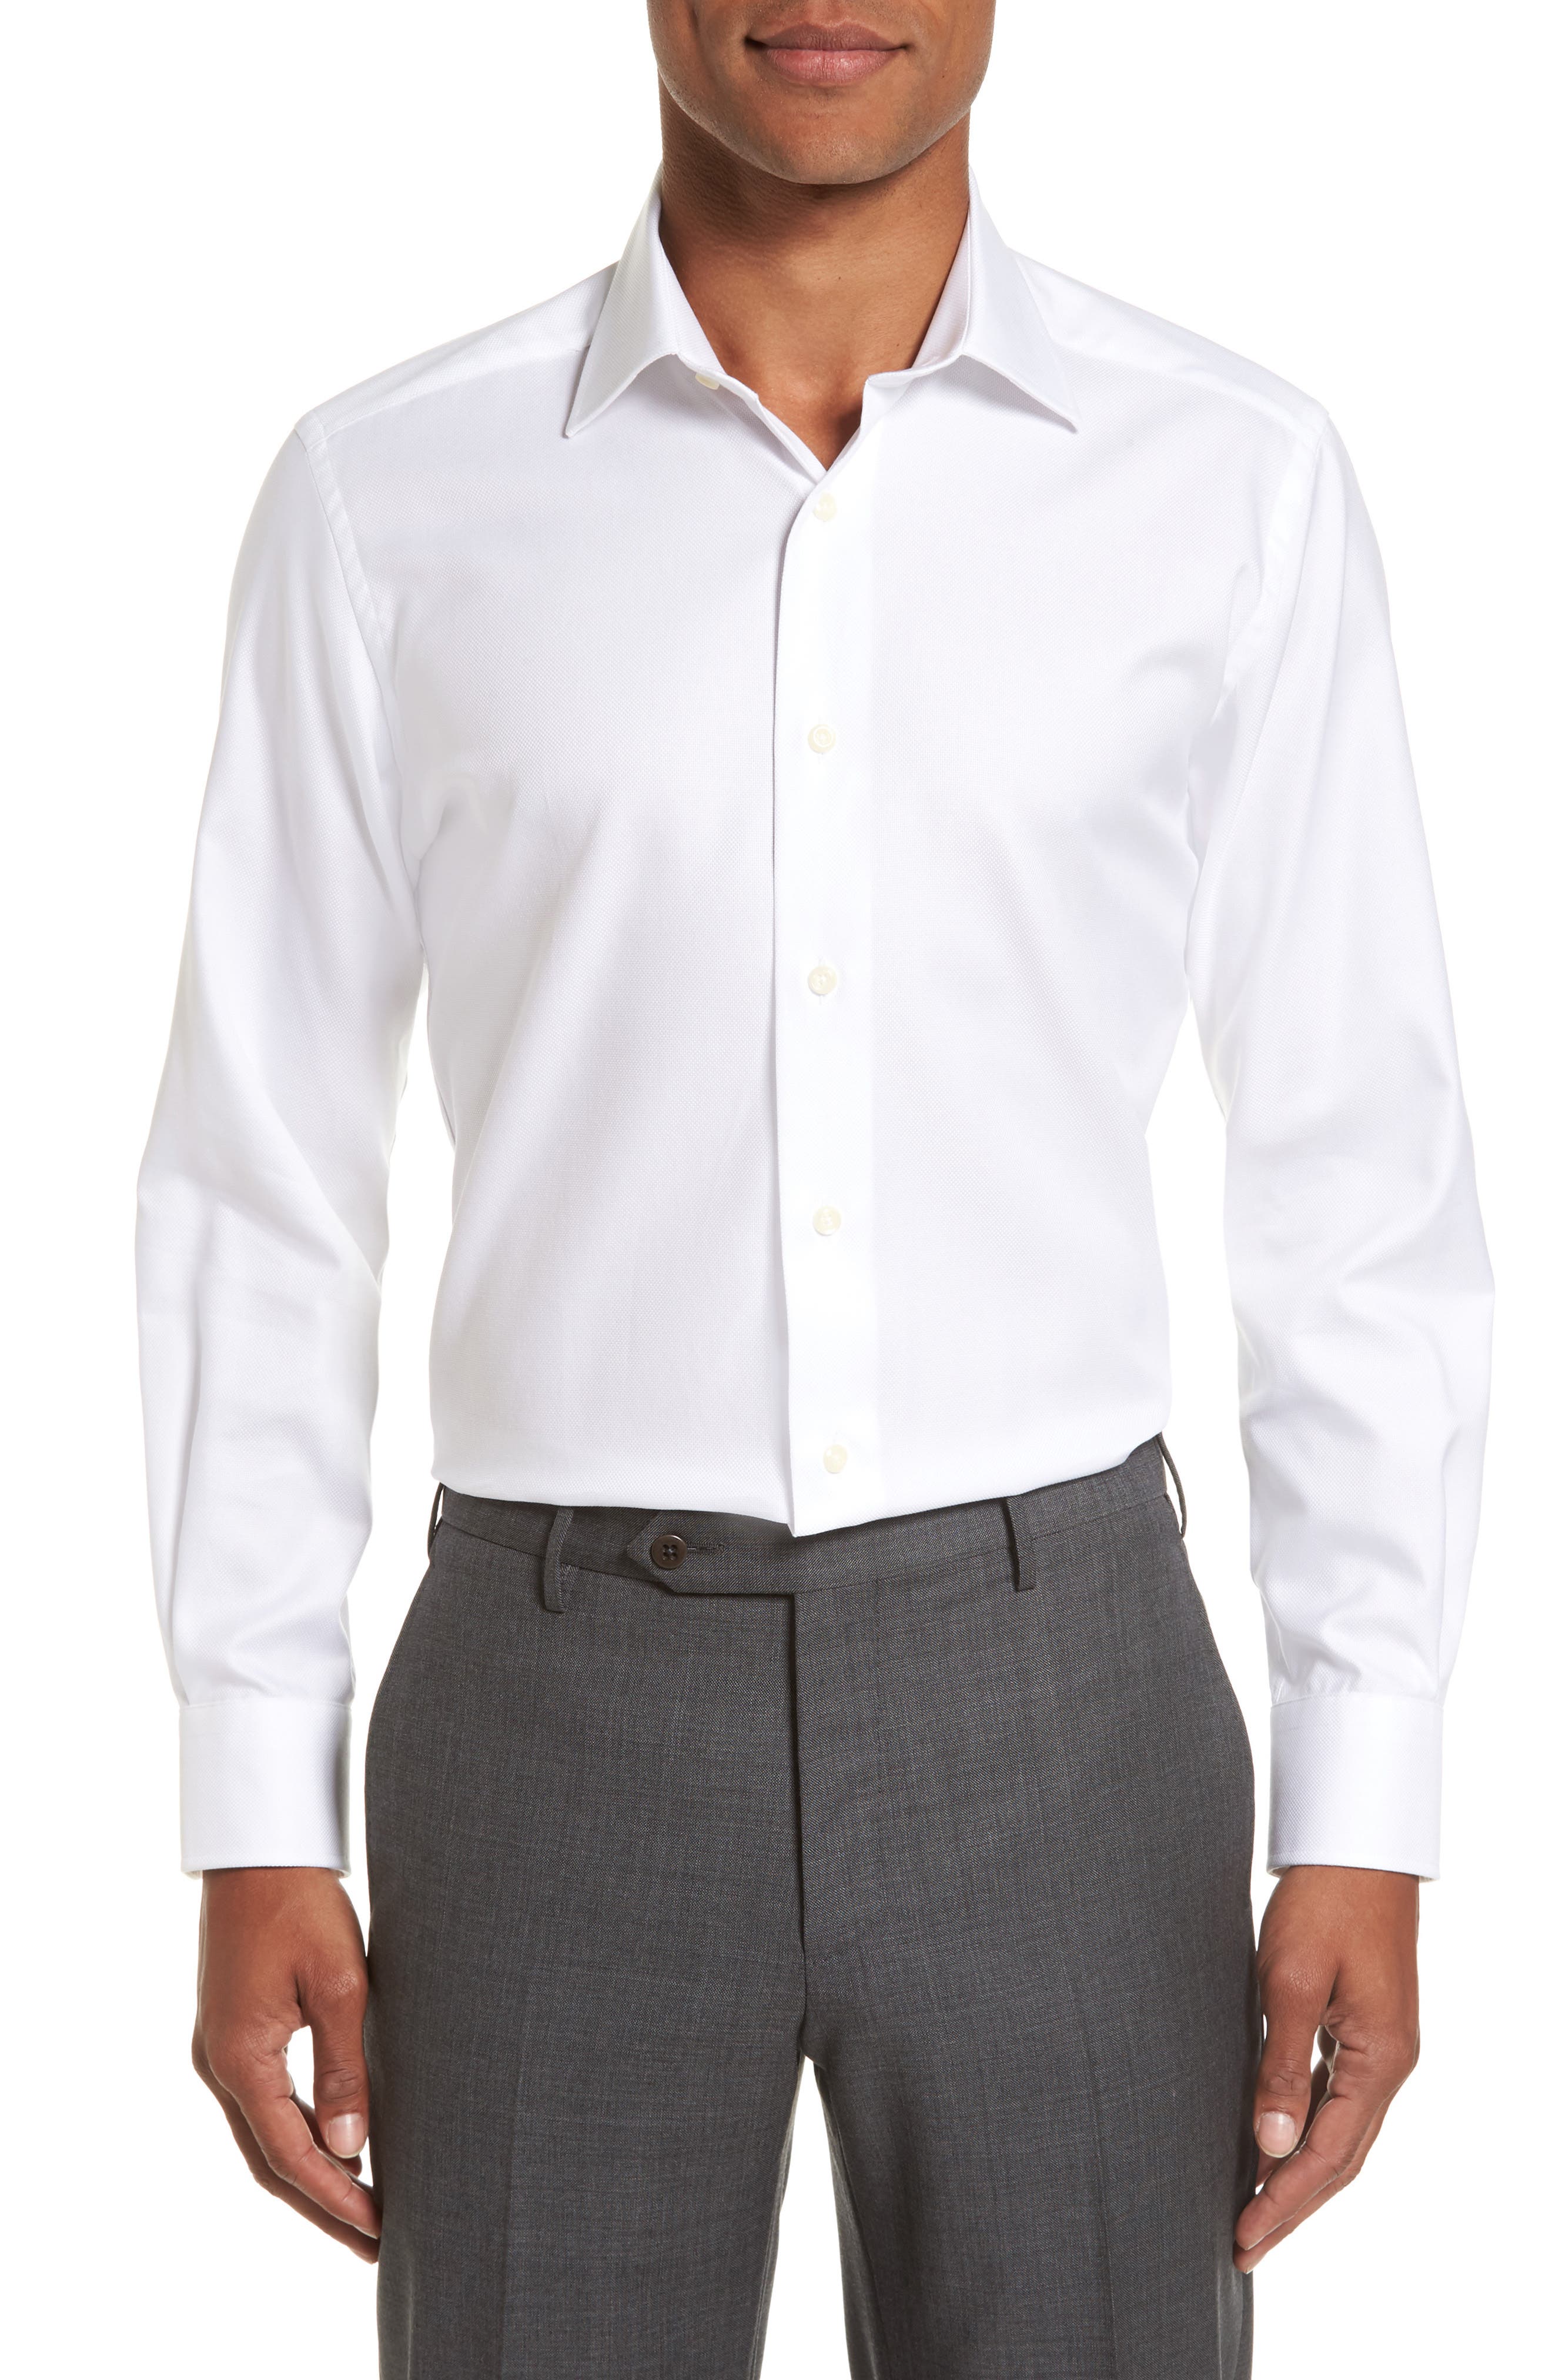 Brand New Mens Quality White Dress Shirts Sizes 20" 23" Double Cuffed 